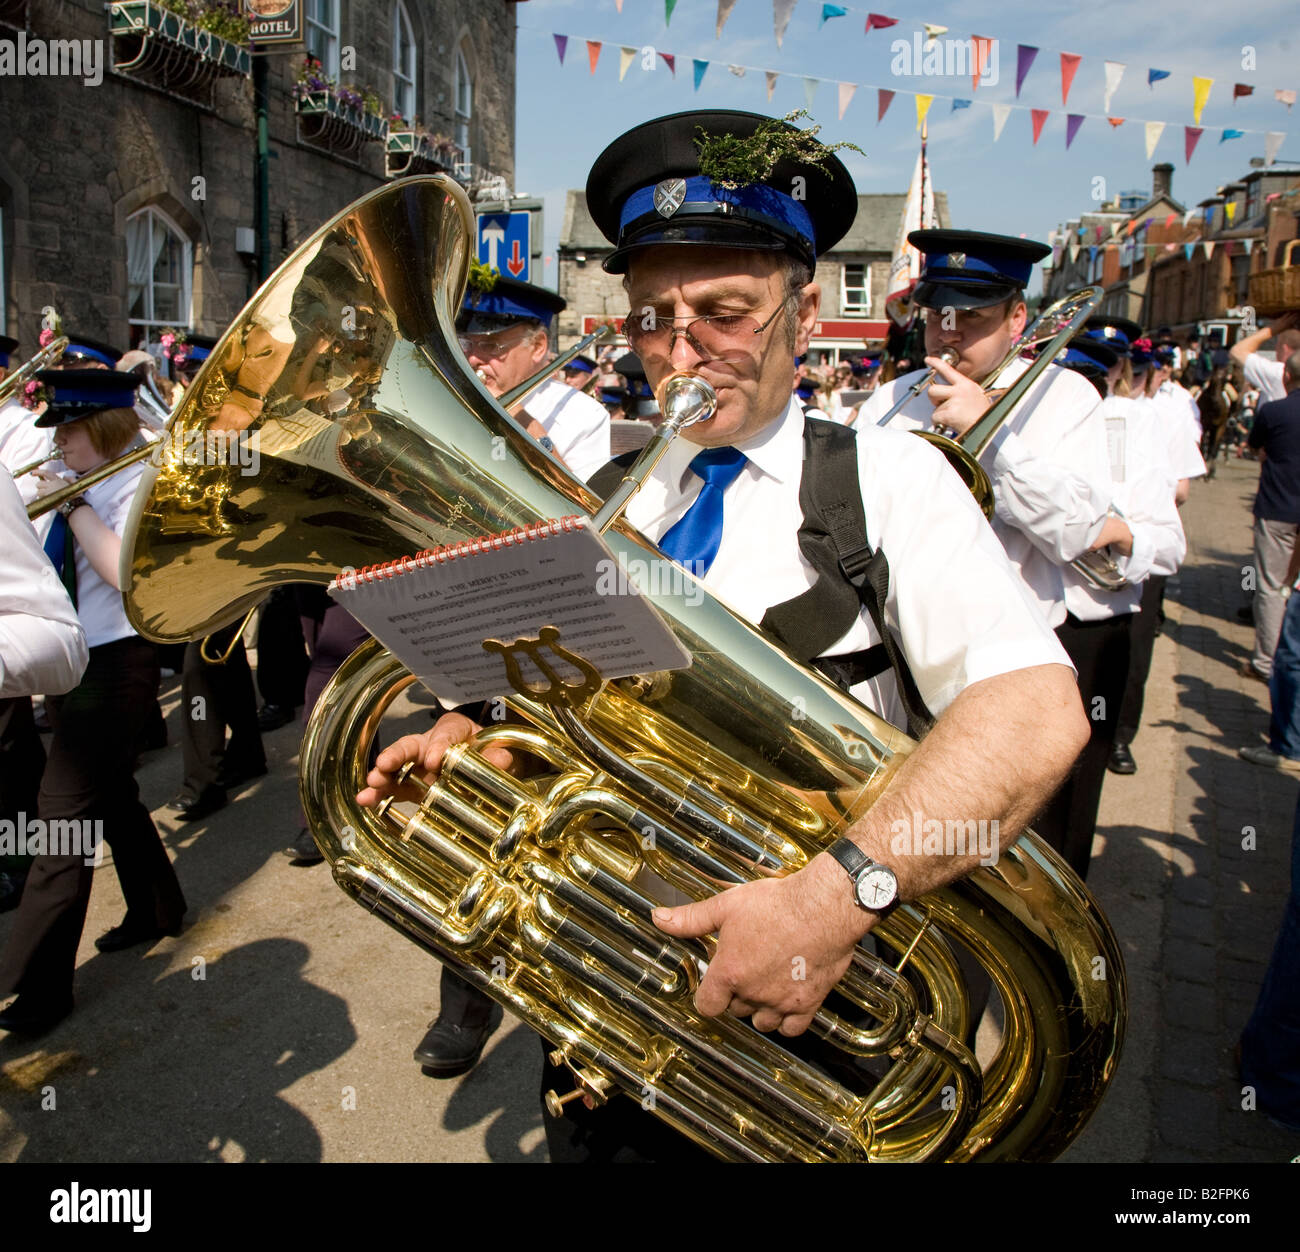 Man Playing Tubar In  The Marching Brass Band During The Langholm Common Riding Langholm Scotland UK Stock Photo